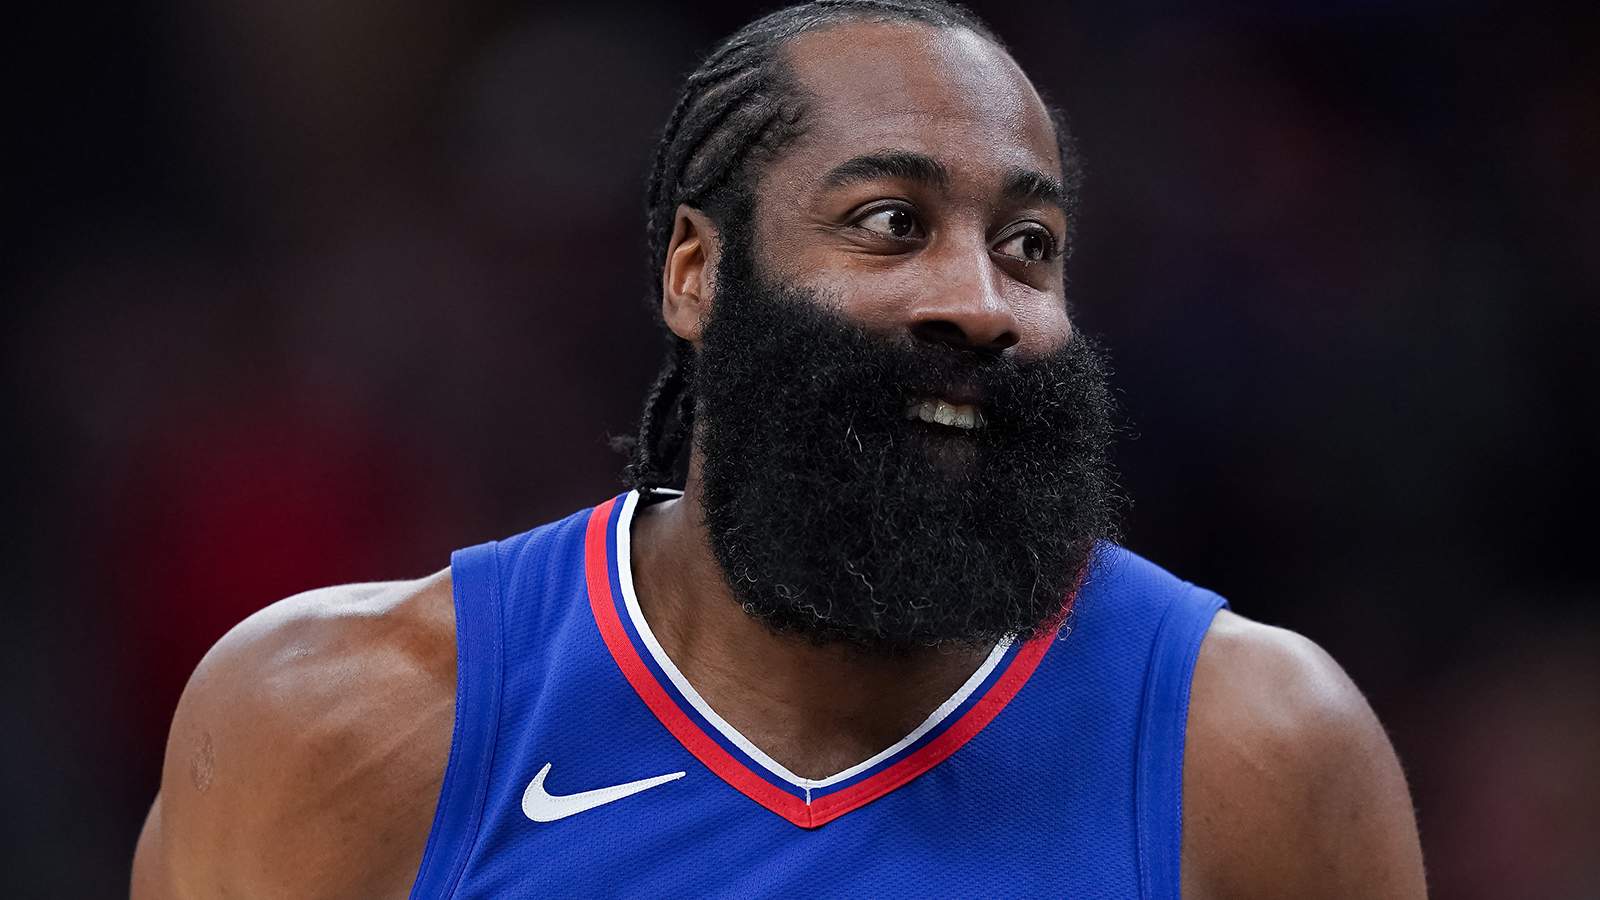 Clippers guard James Harden